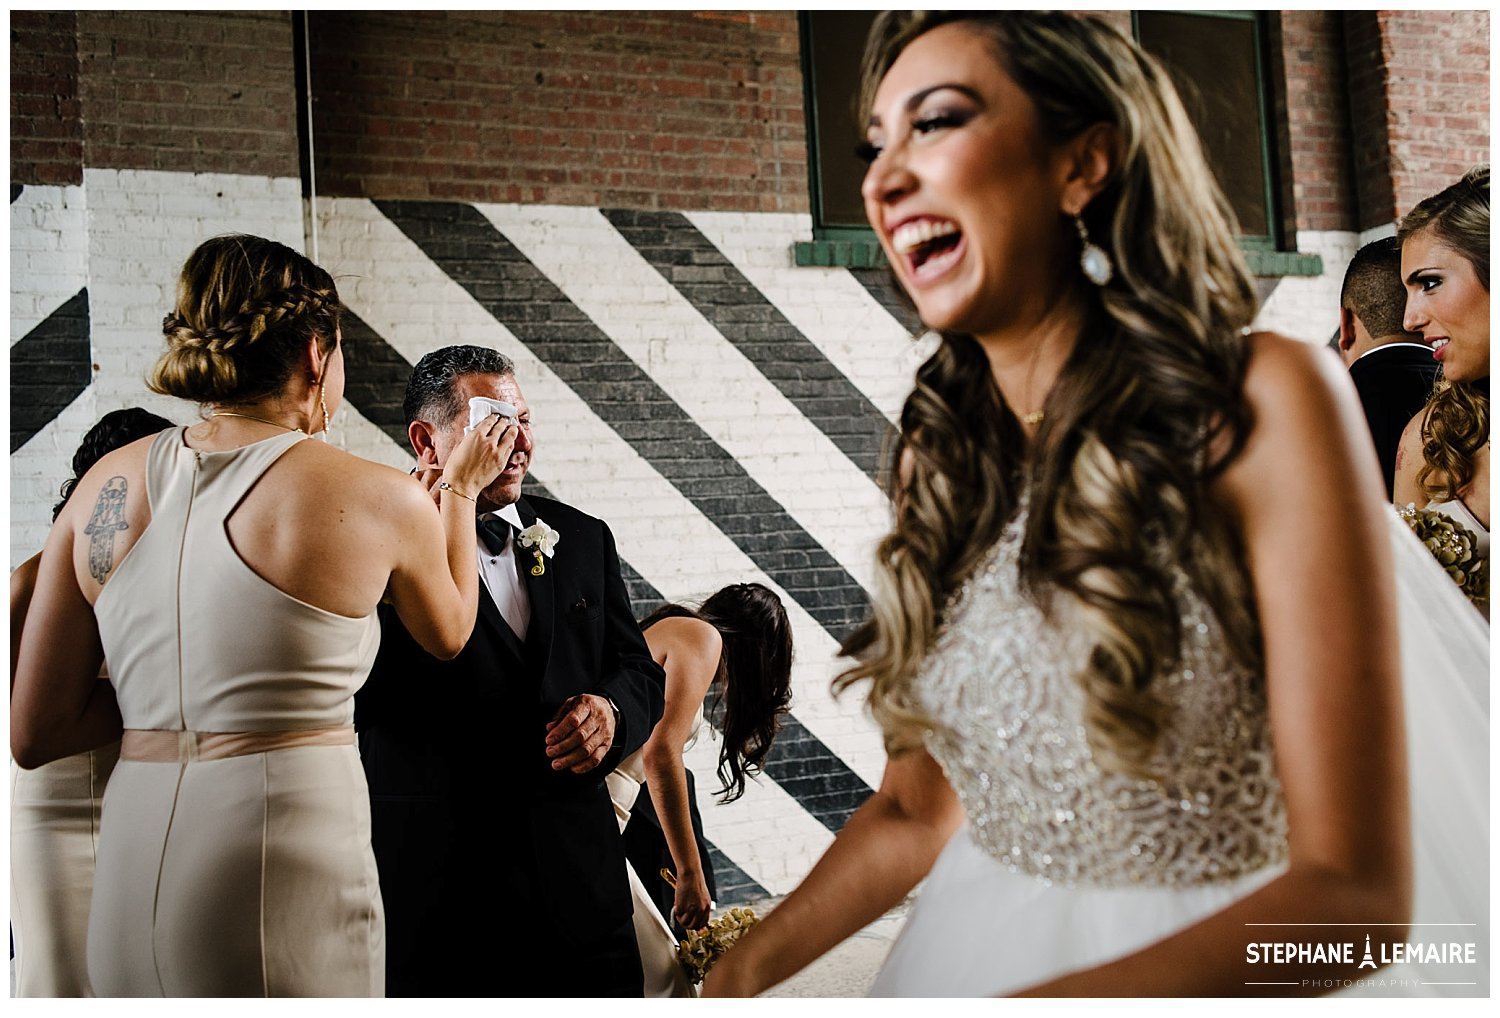 Epic Railyard  wedding ceremony pictures by Stephane Lemaire